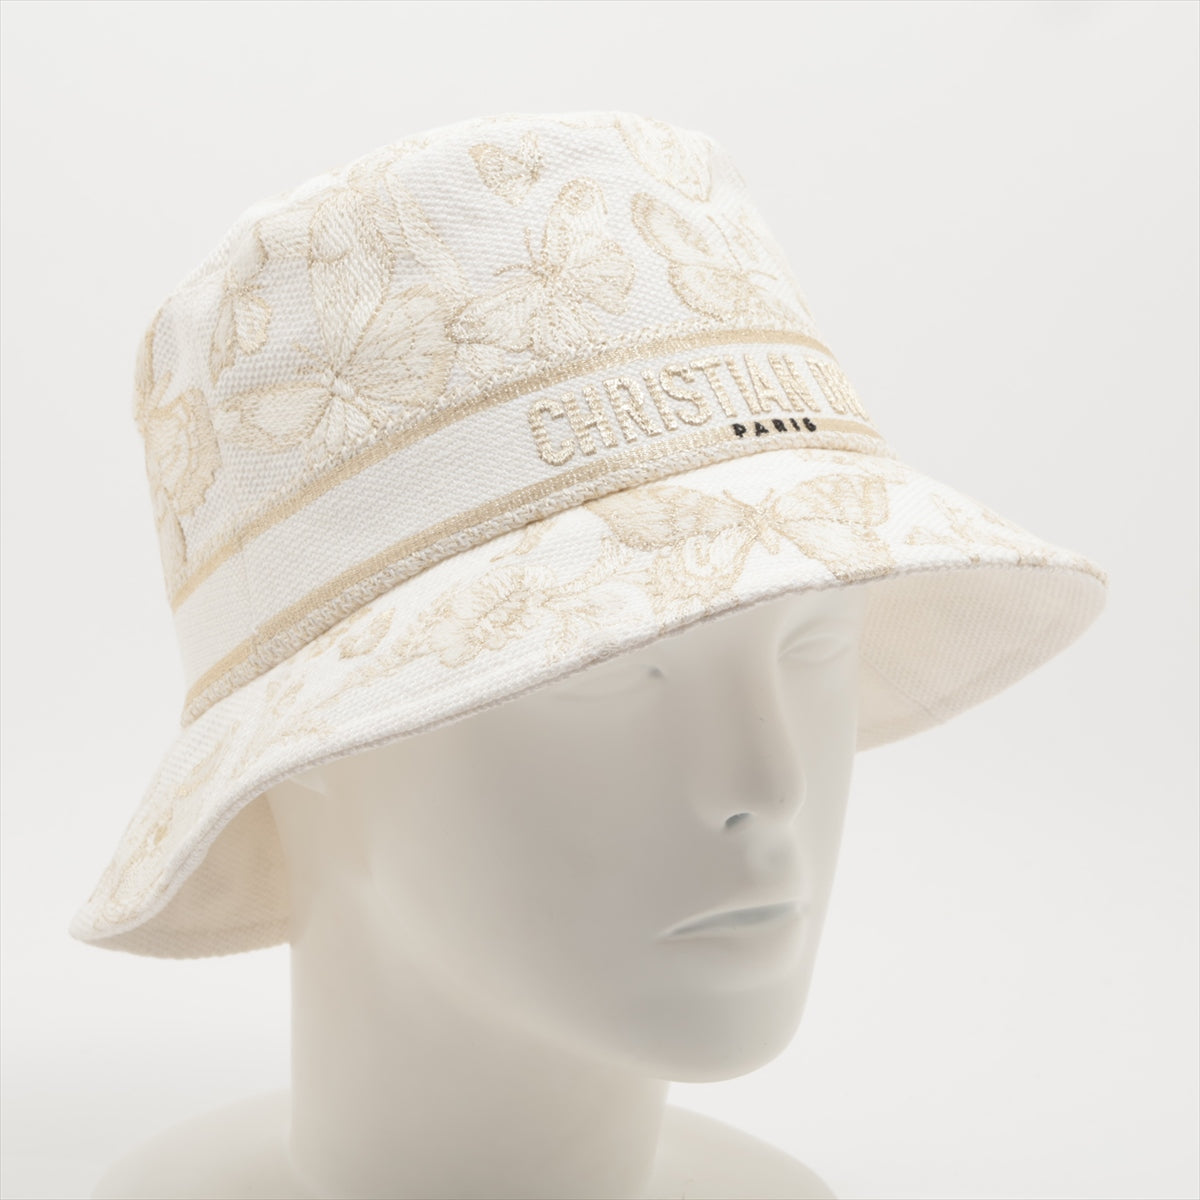 Dior Toile Doo JUY Embroidery Hat 56 Cotton & Polyester White x gold 41DTM923X131 Mexico Butterfly